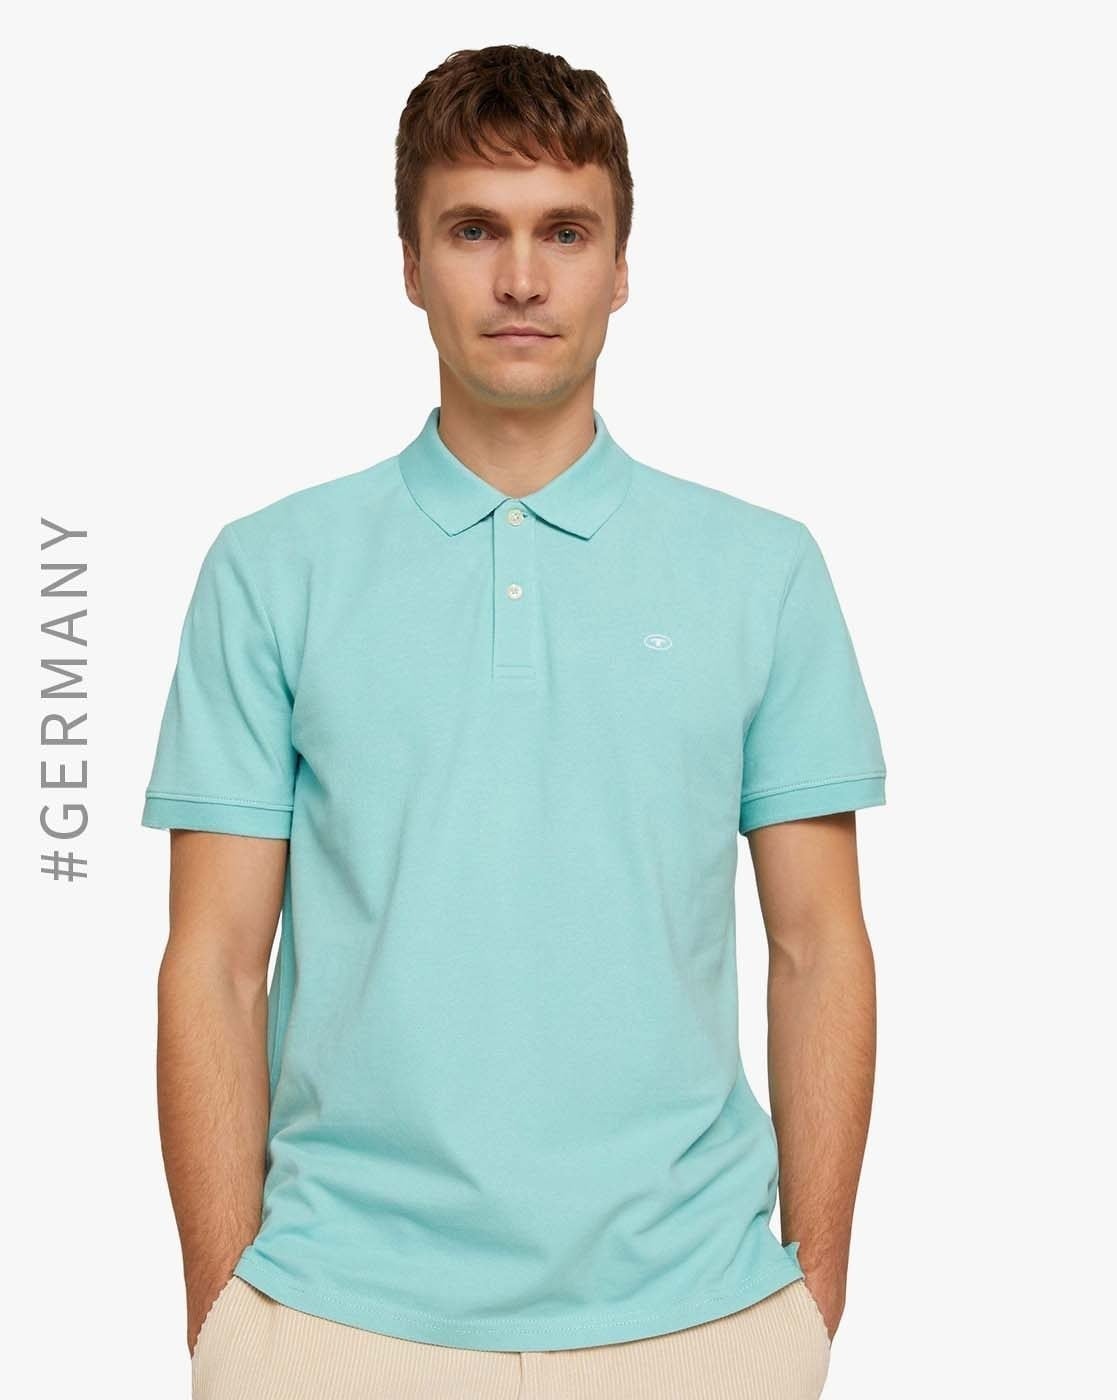 Mint Green Tailor Men Buy Online Tshirts Tom by for